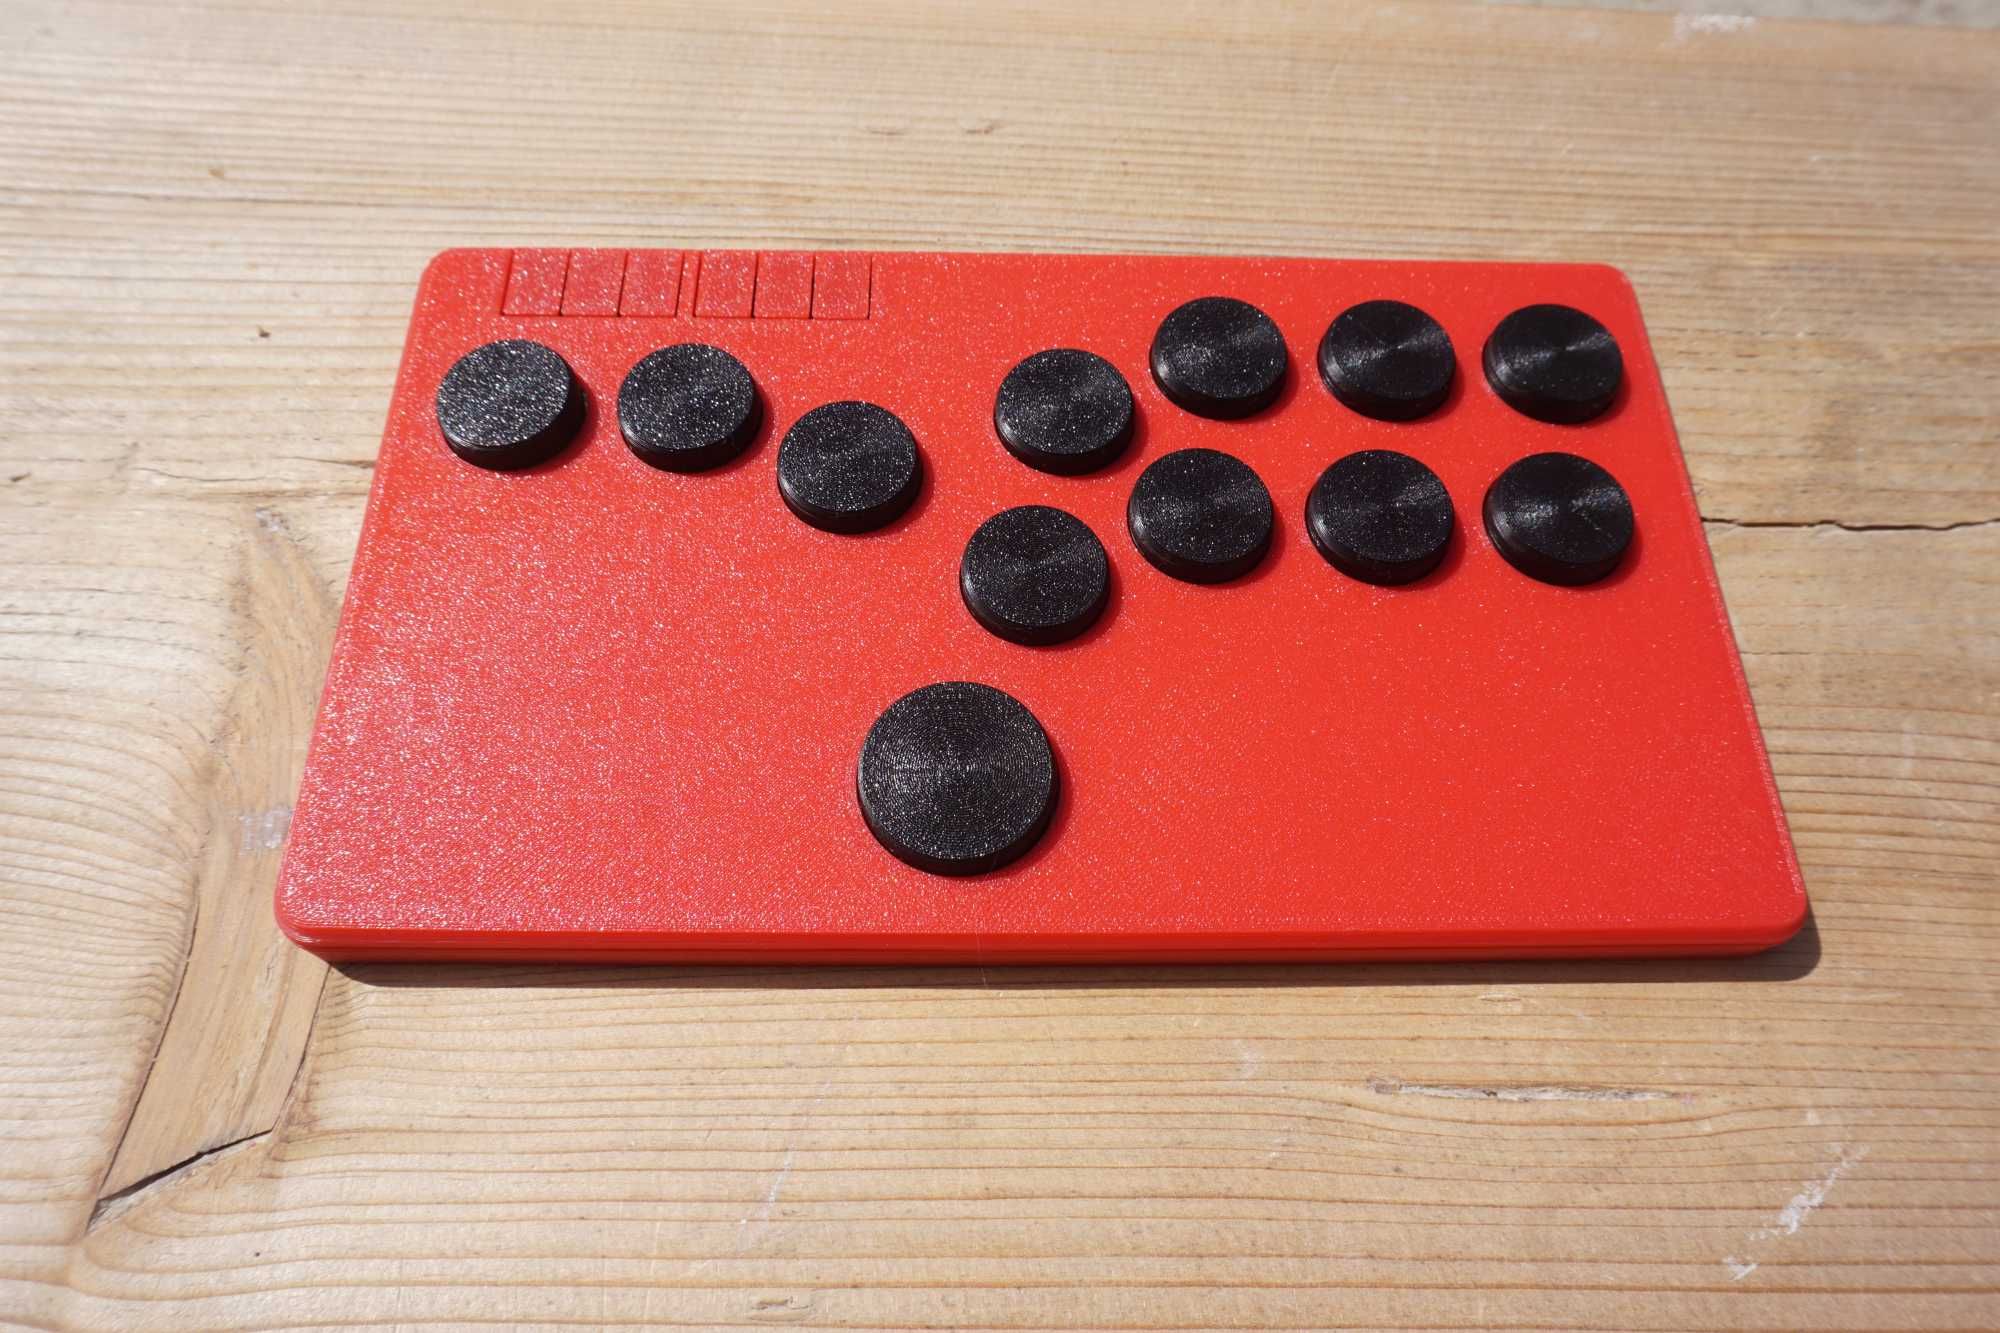 Hitbox style stickless arcade fighting stick controller